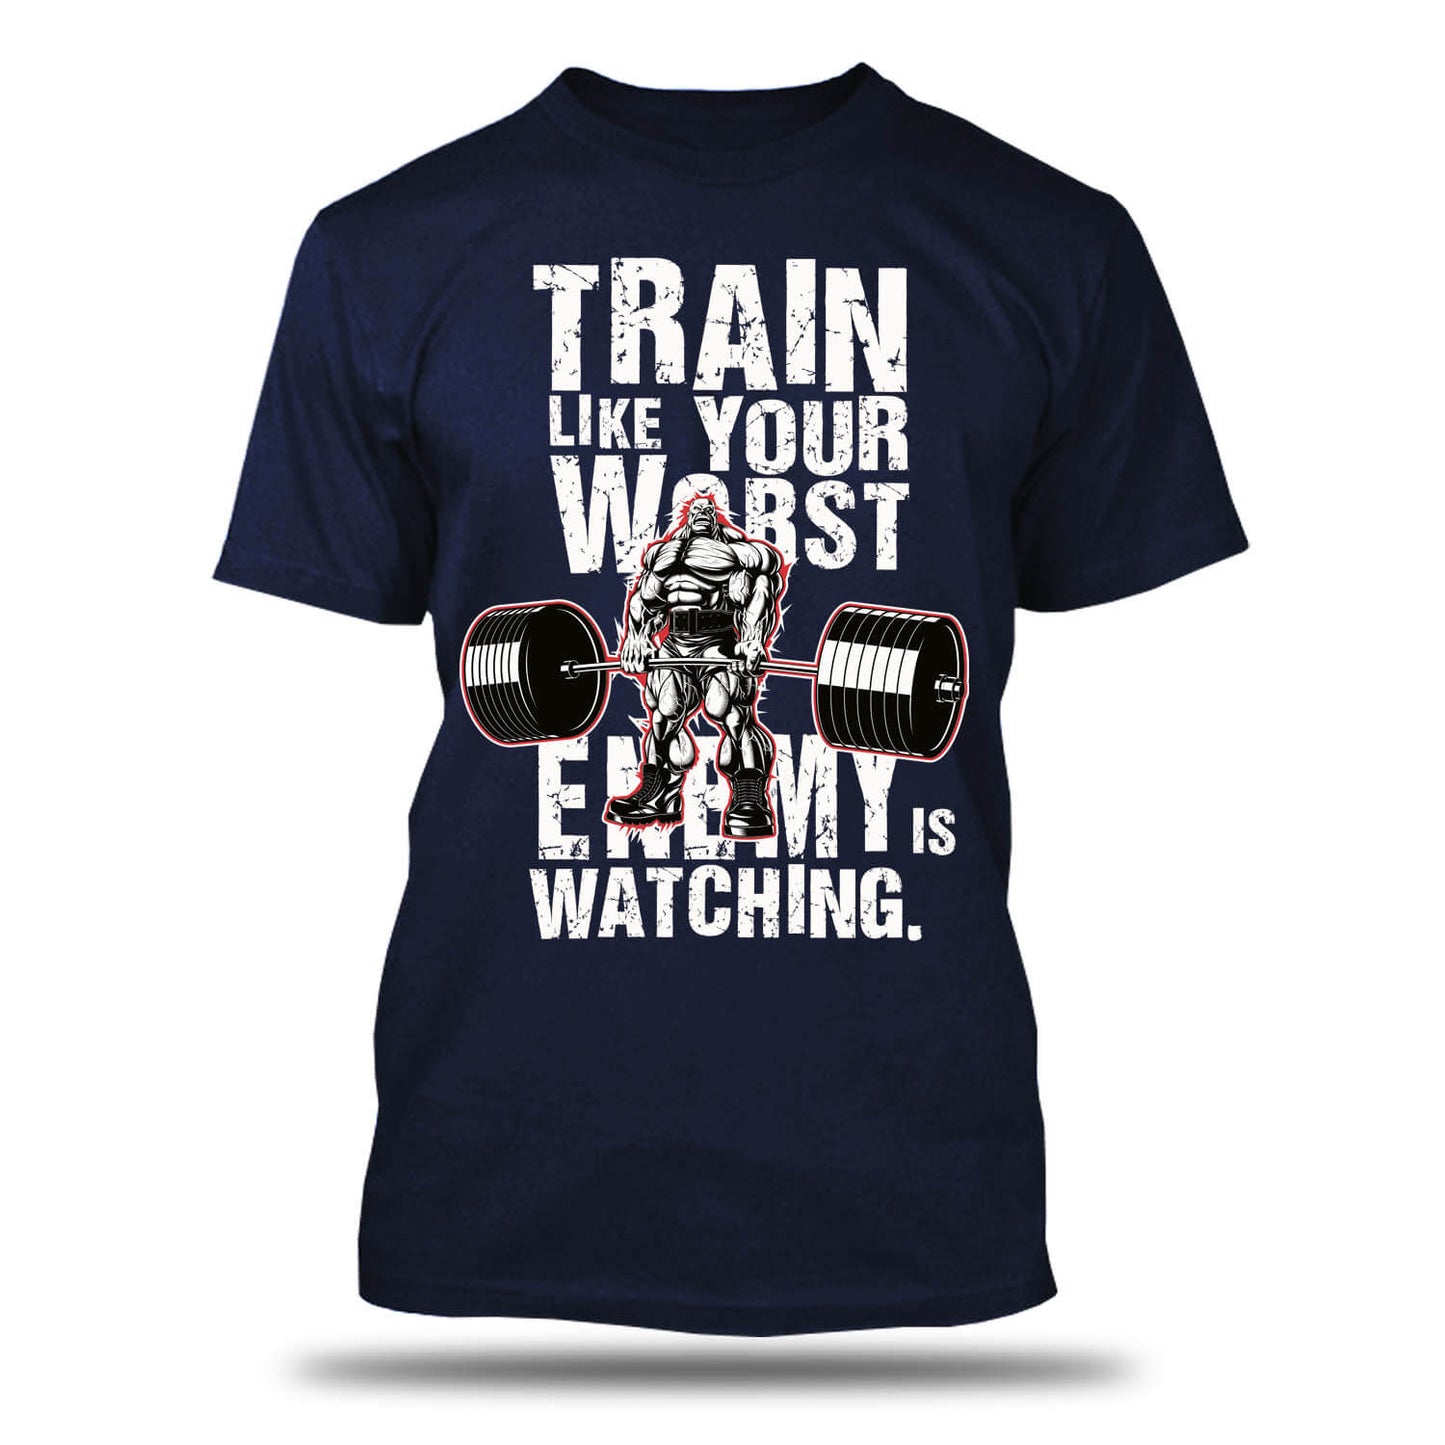 Train Like Your Worst Enemy is Watching